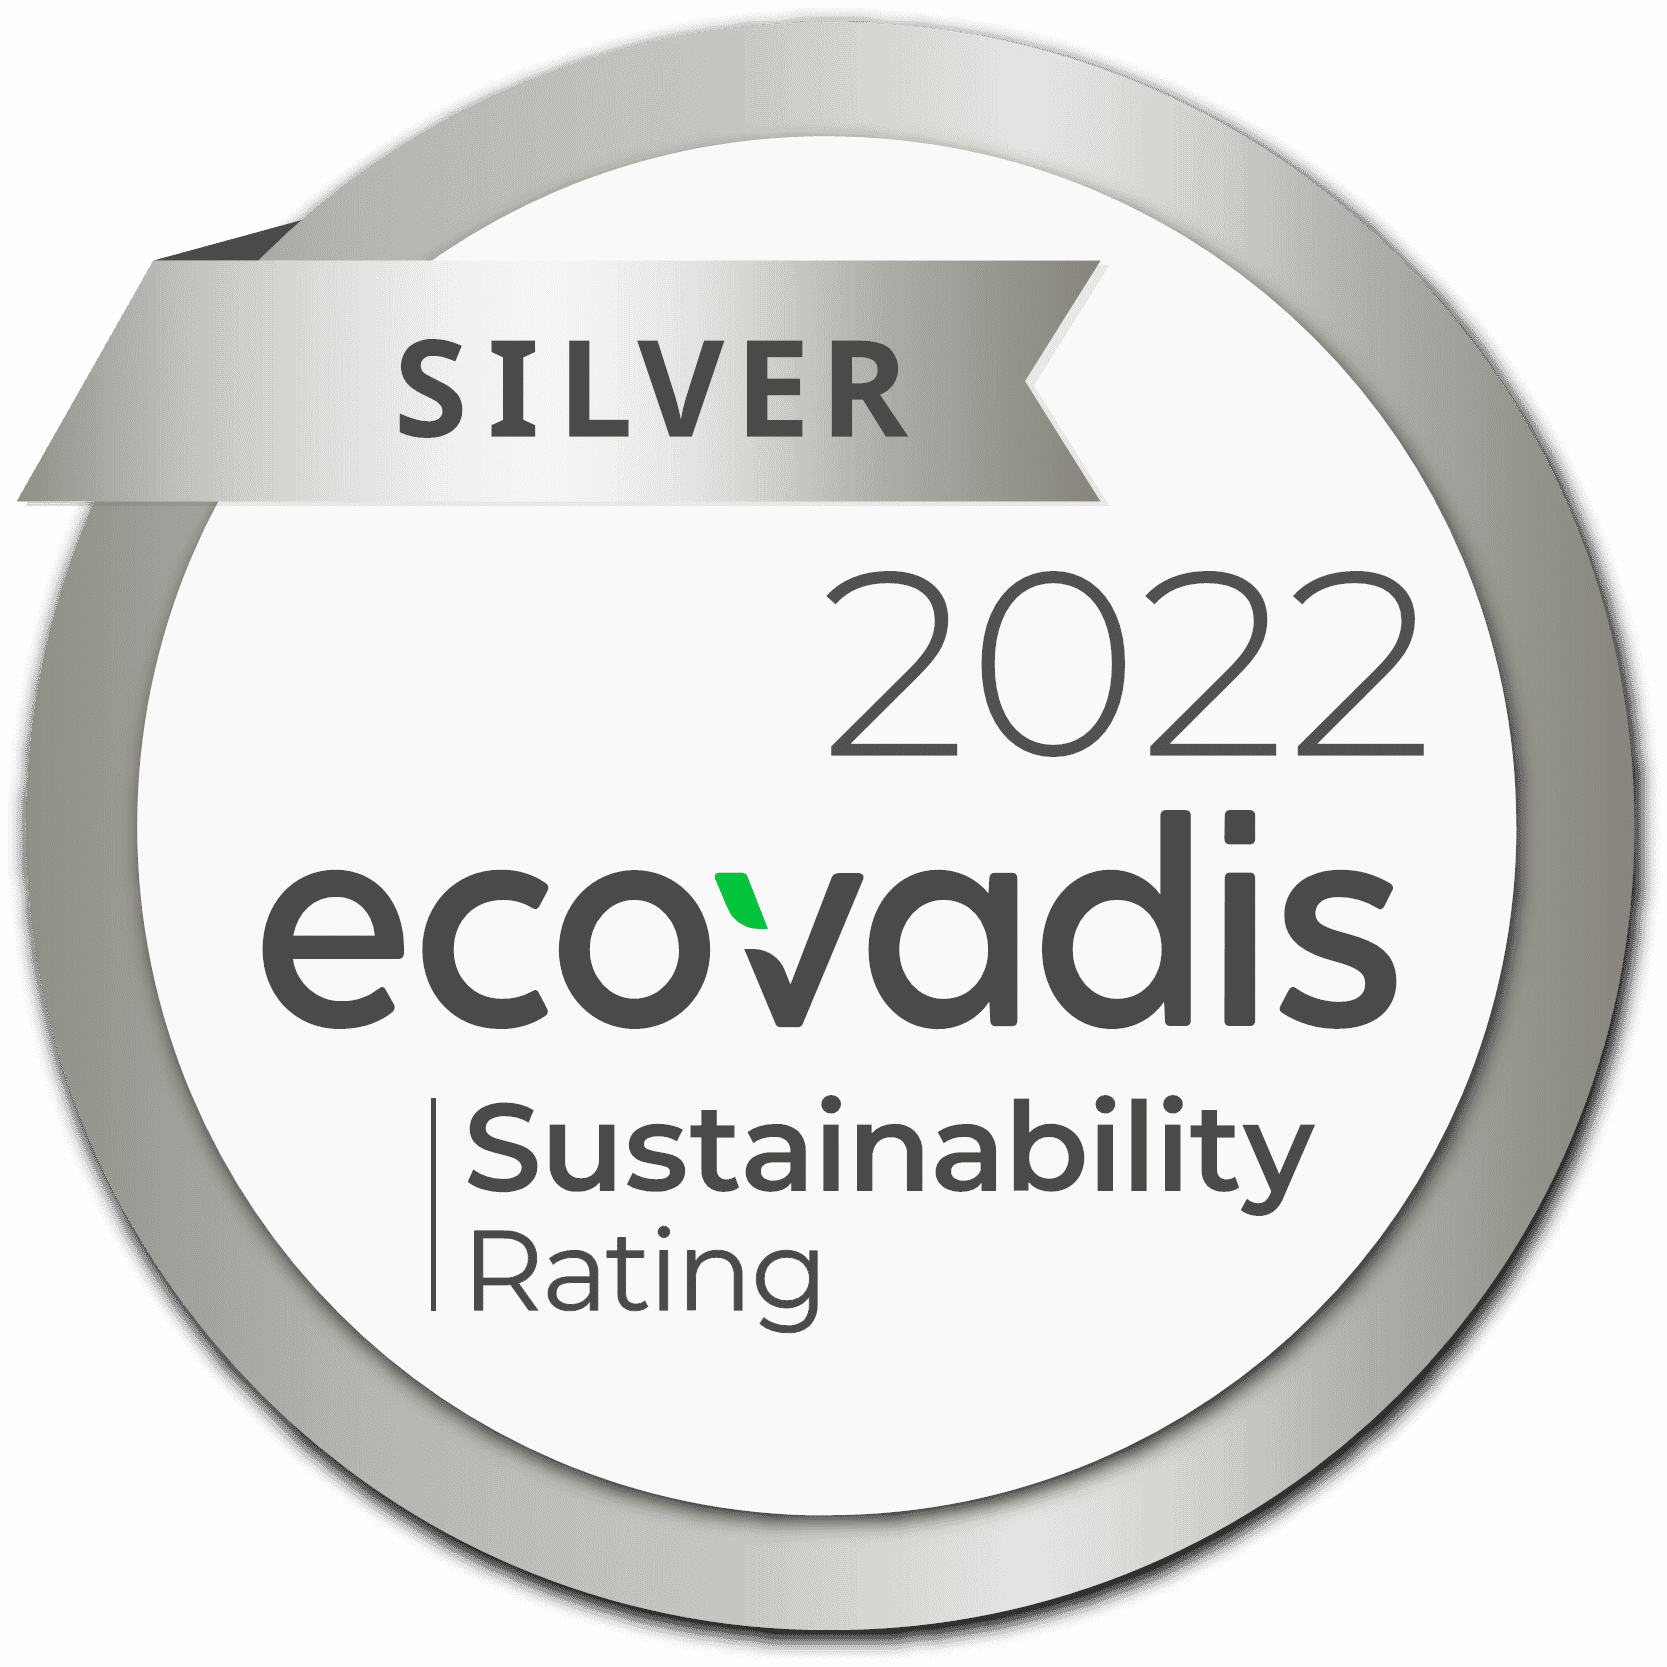 Ecovadis Silver Sustainability Rating 2022